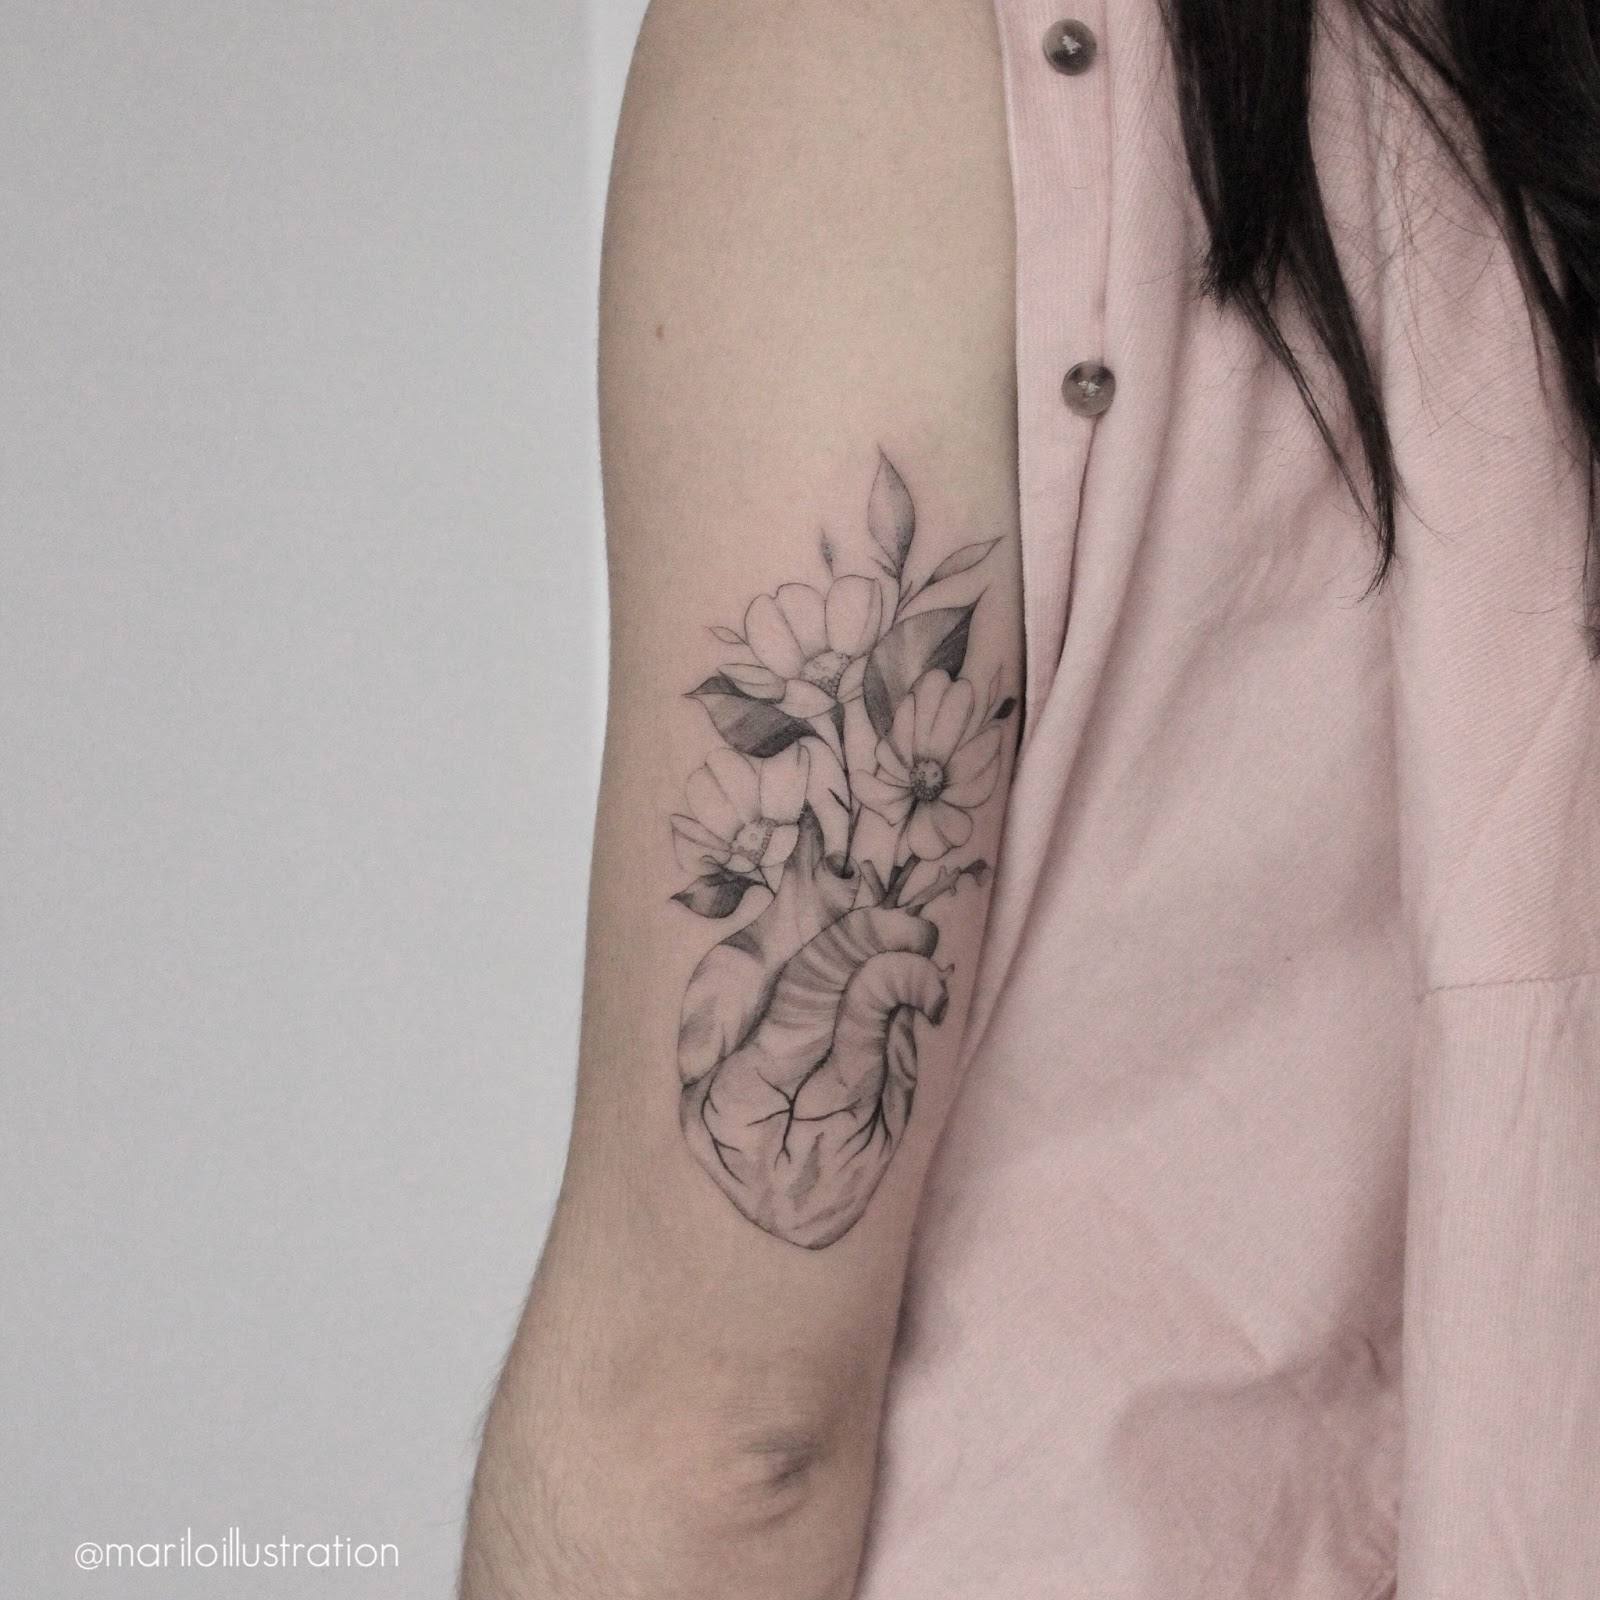 Anatomical Heart Tattoo Designs For Guys With Meaning (73)